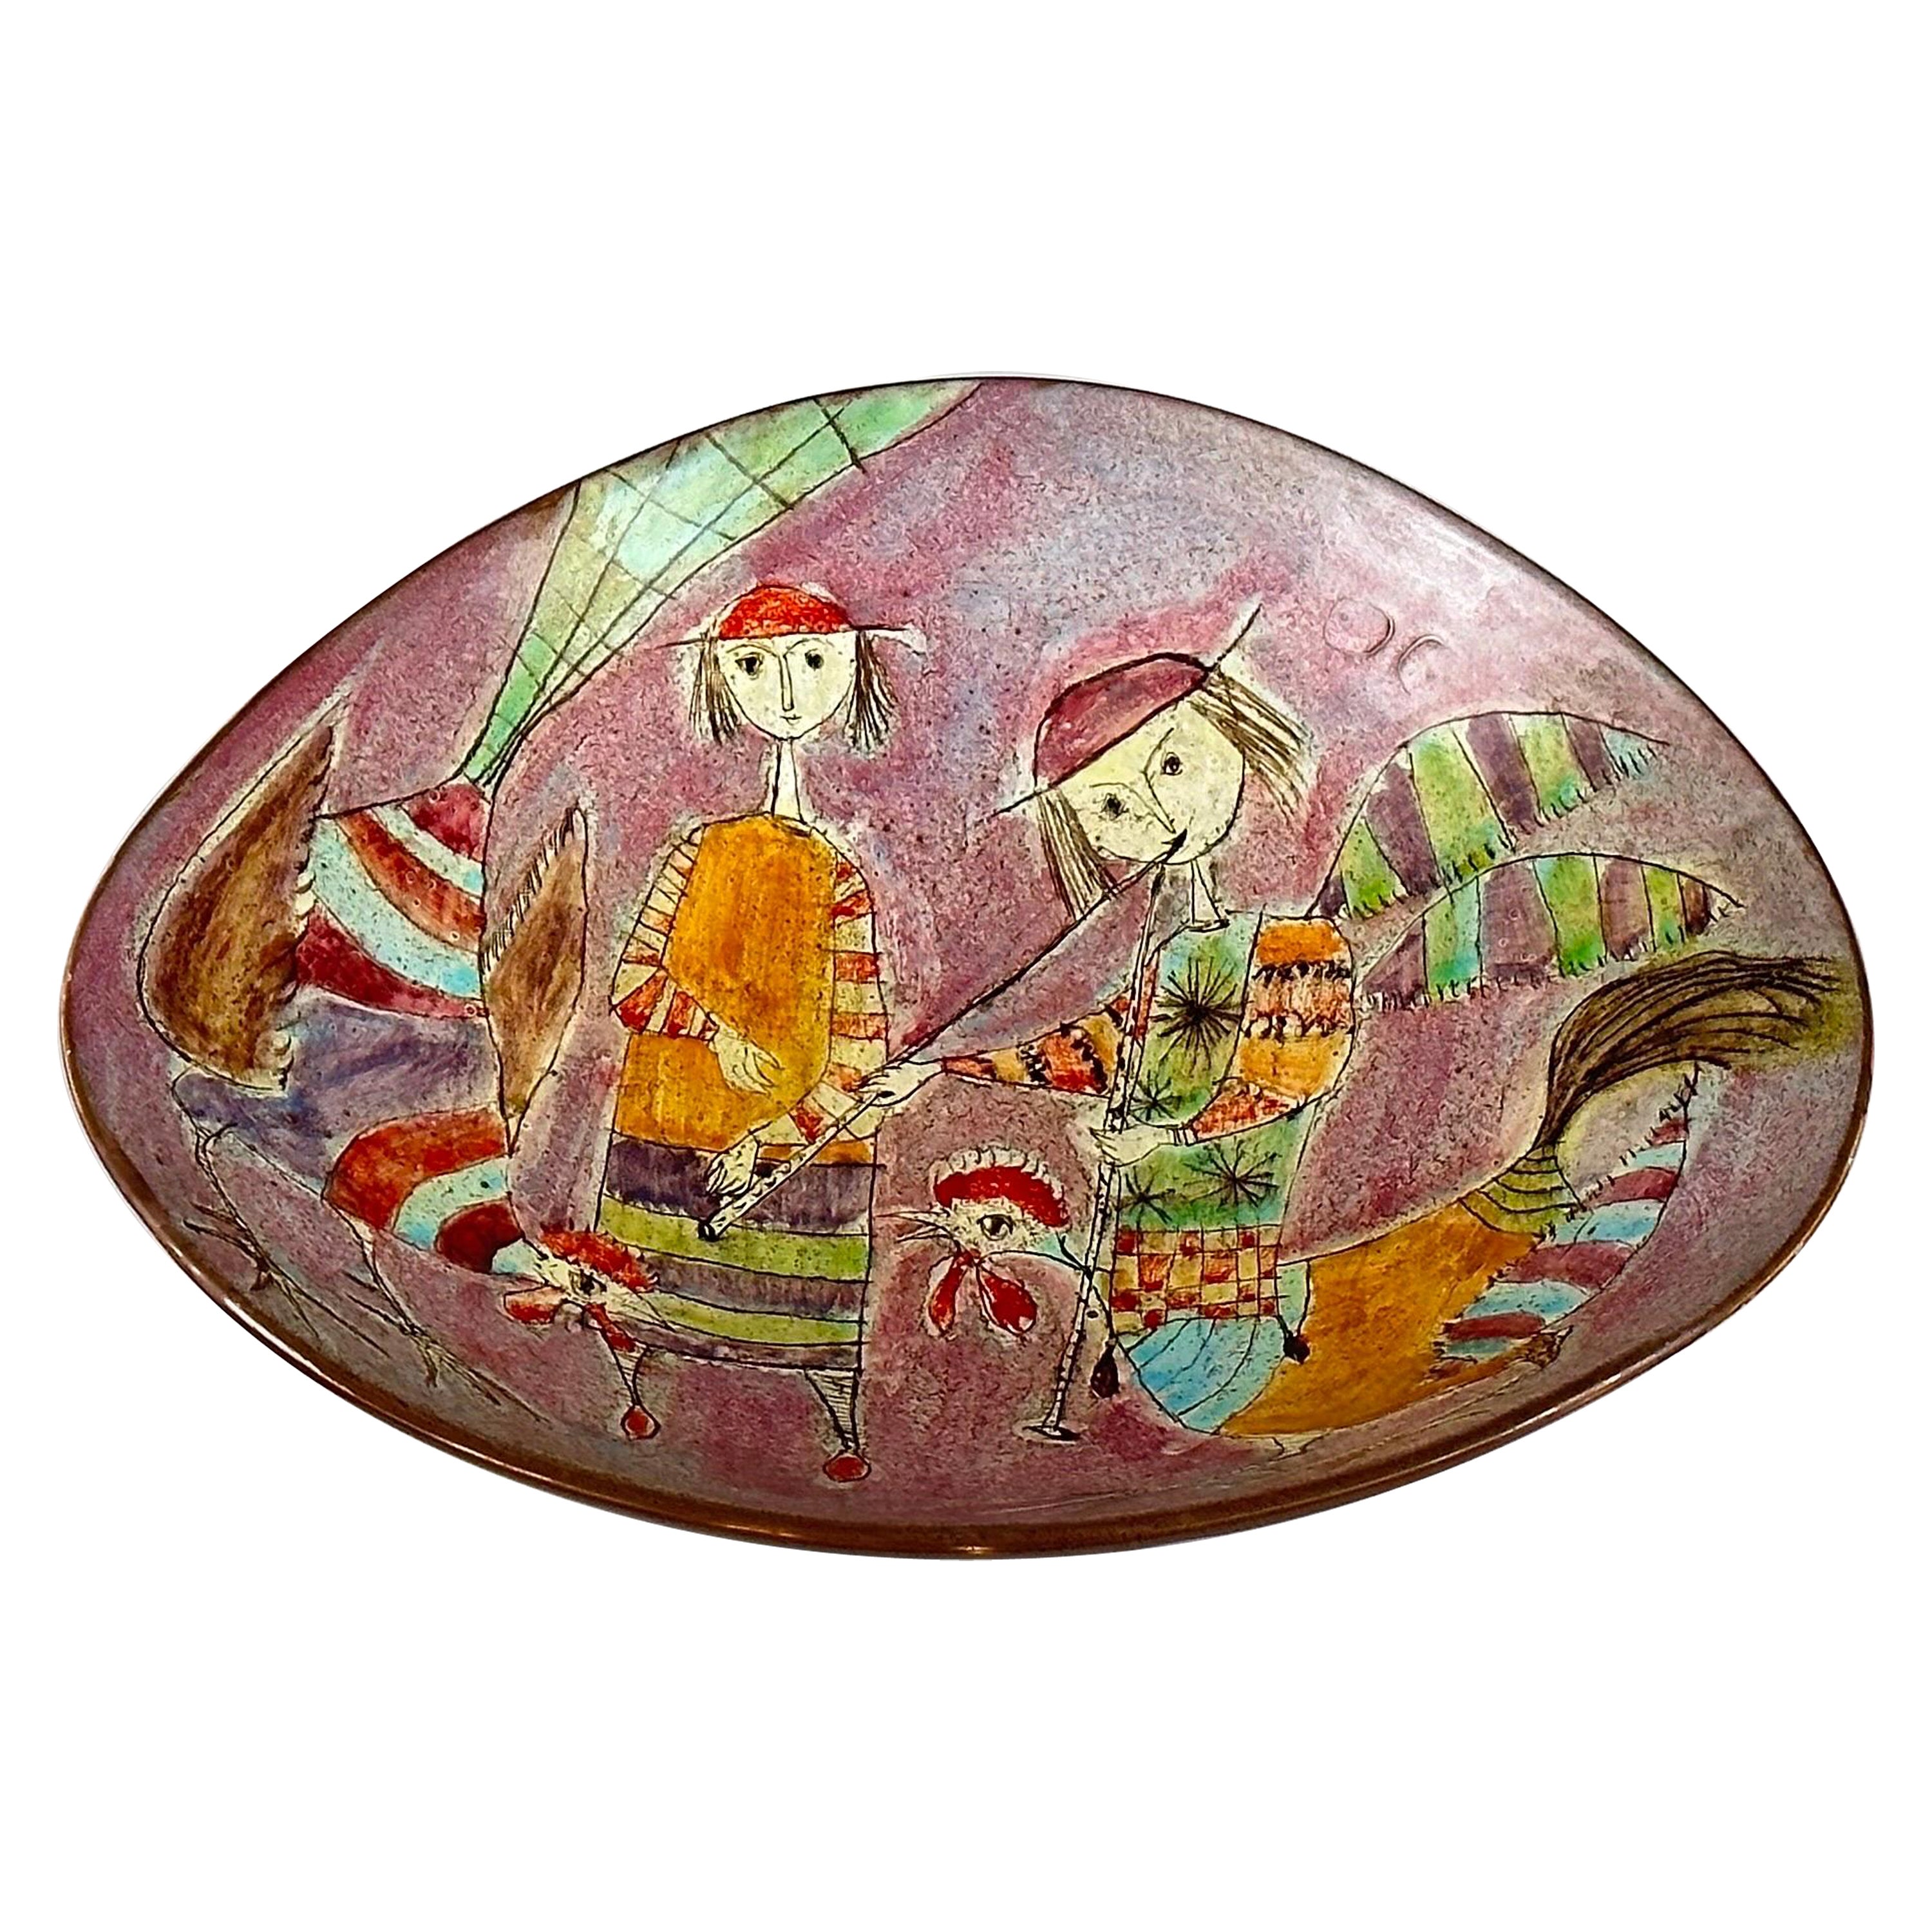 Whimsical Hand-Painted Ceramic Plate by Baratti Pesaro, 1970s  For Sale